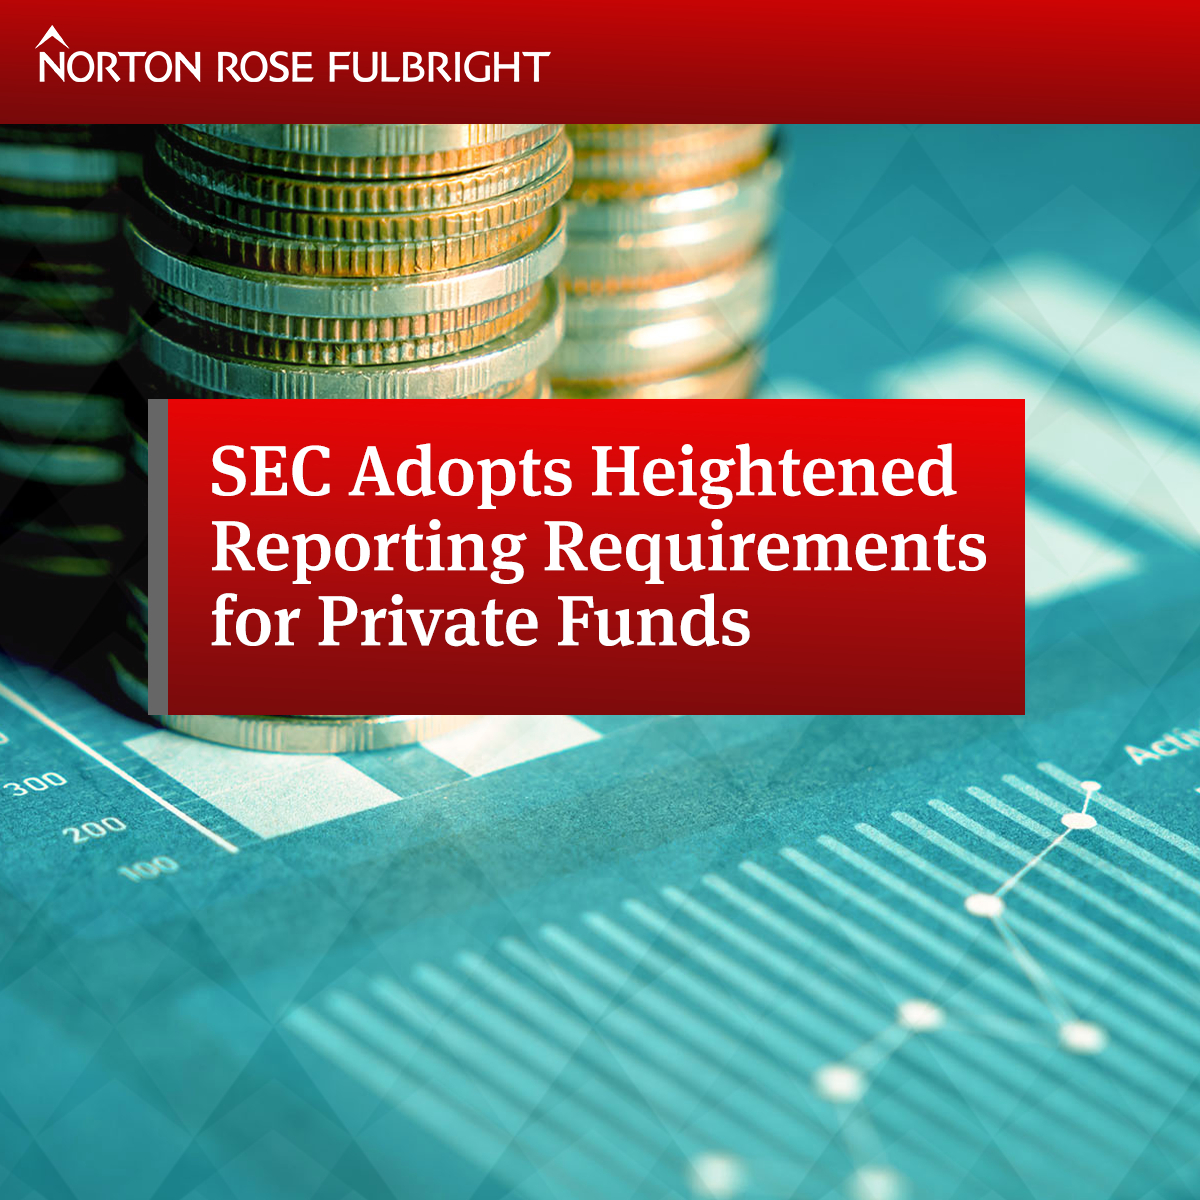 sec-adopts-heightened-reporting-requirements-for-private-funds-united